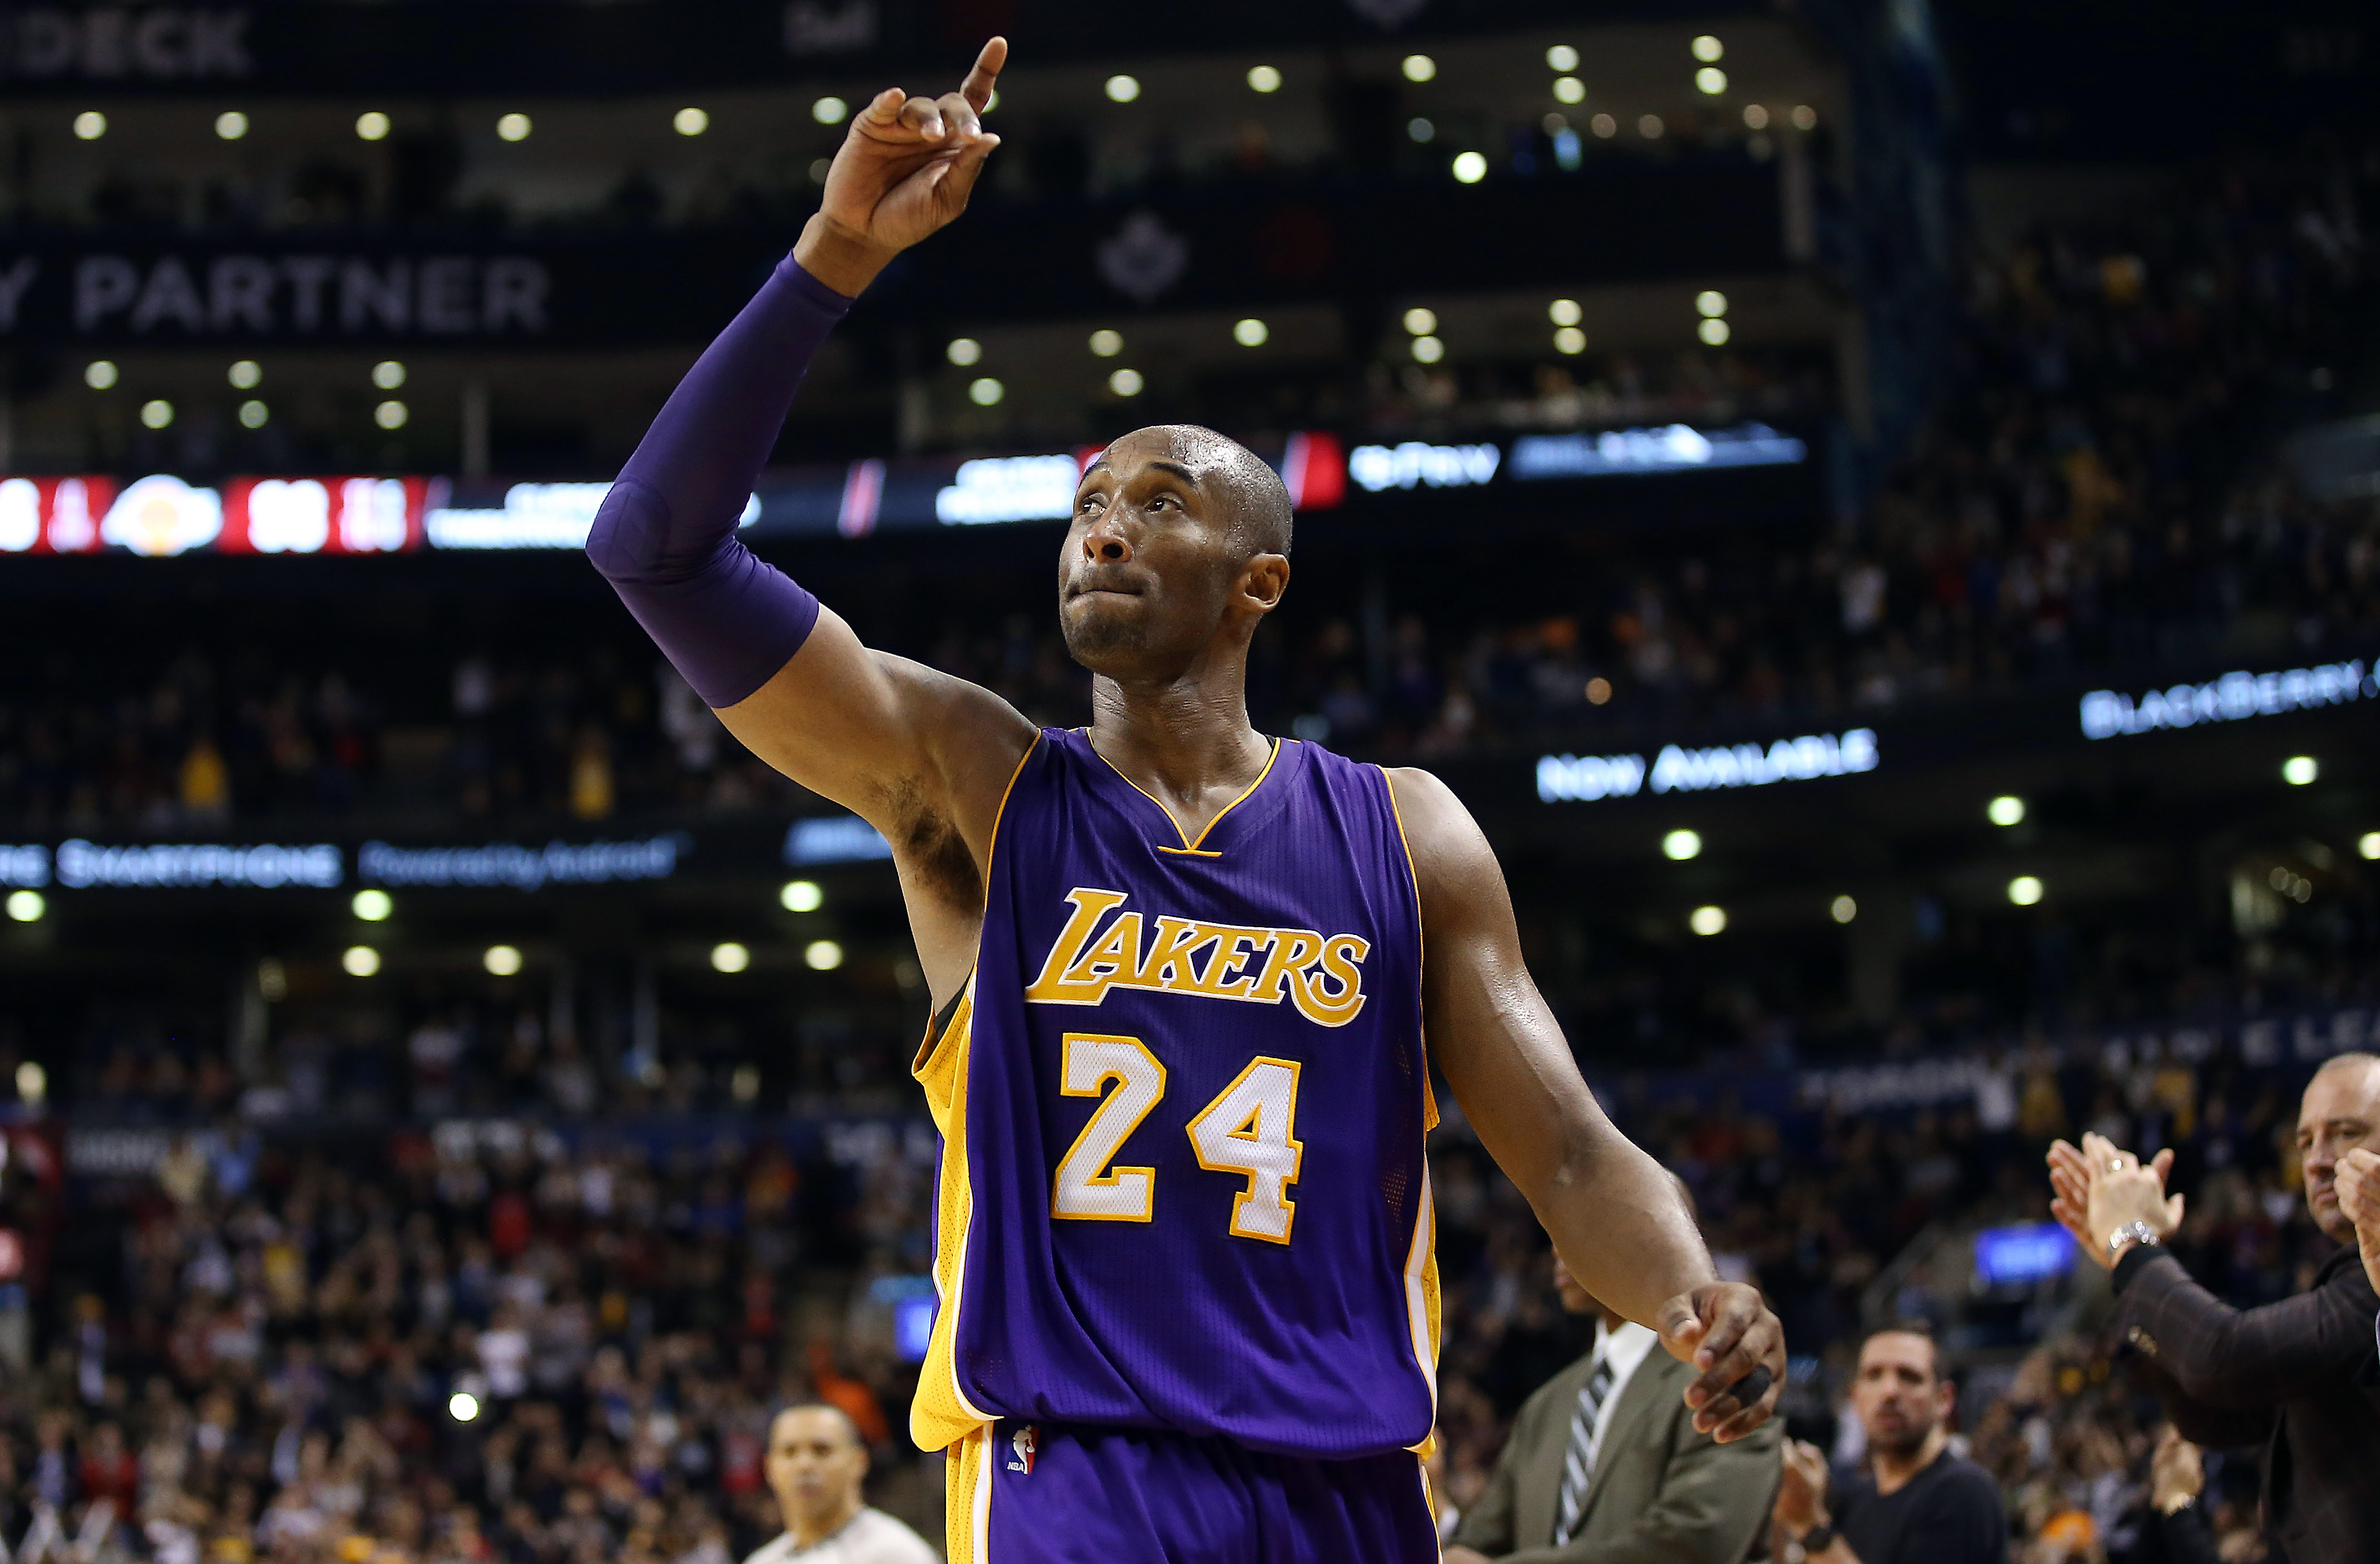 Kobe Bryant: Metta World Peace remembers dinner, rapping with friend